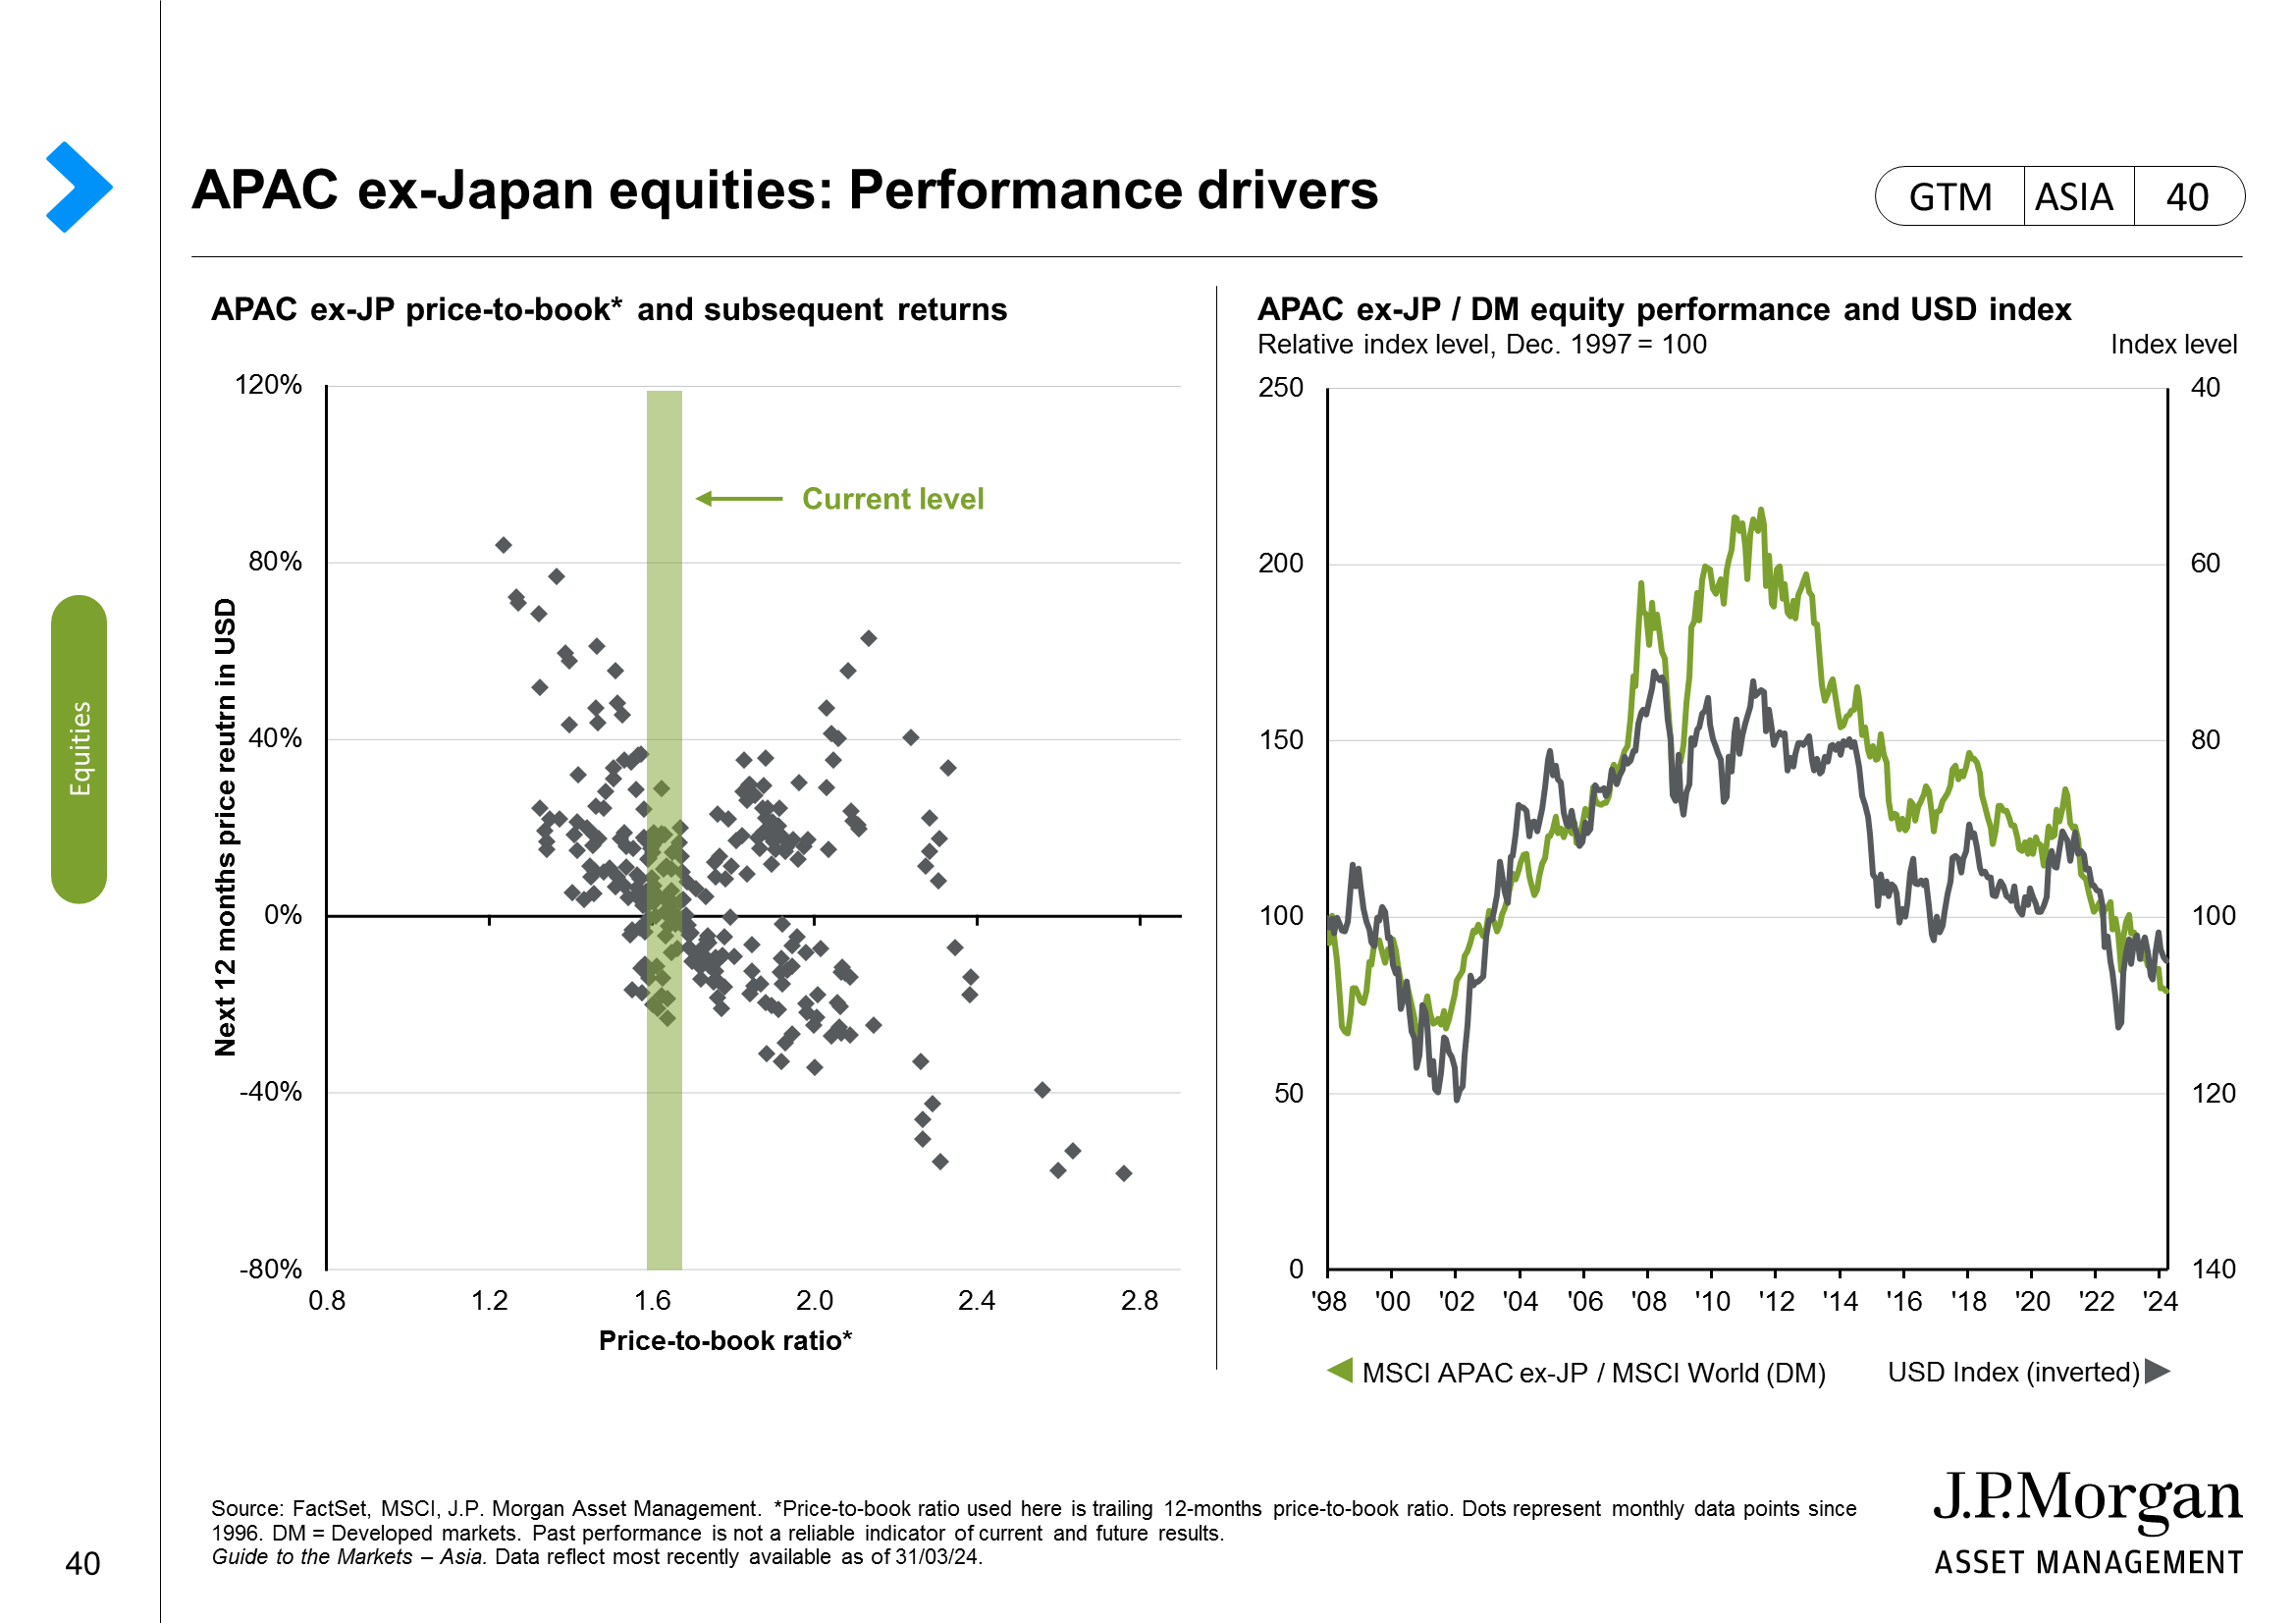 APAC ex-Japan equities: Earnings trend by revenue source and exports